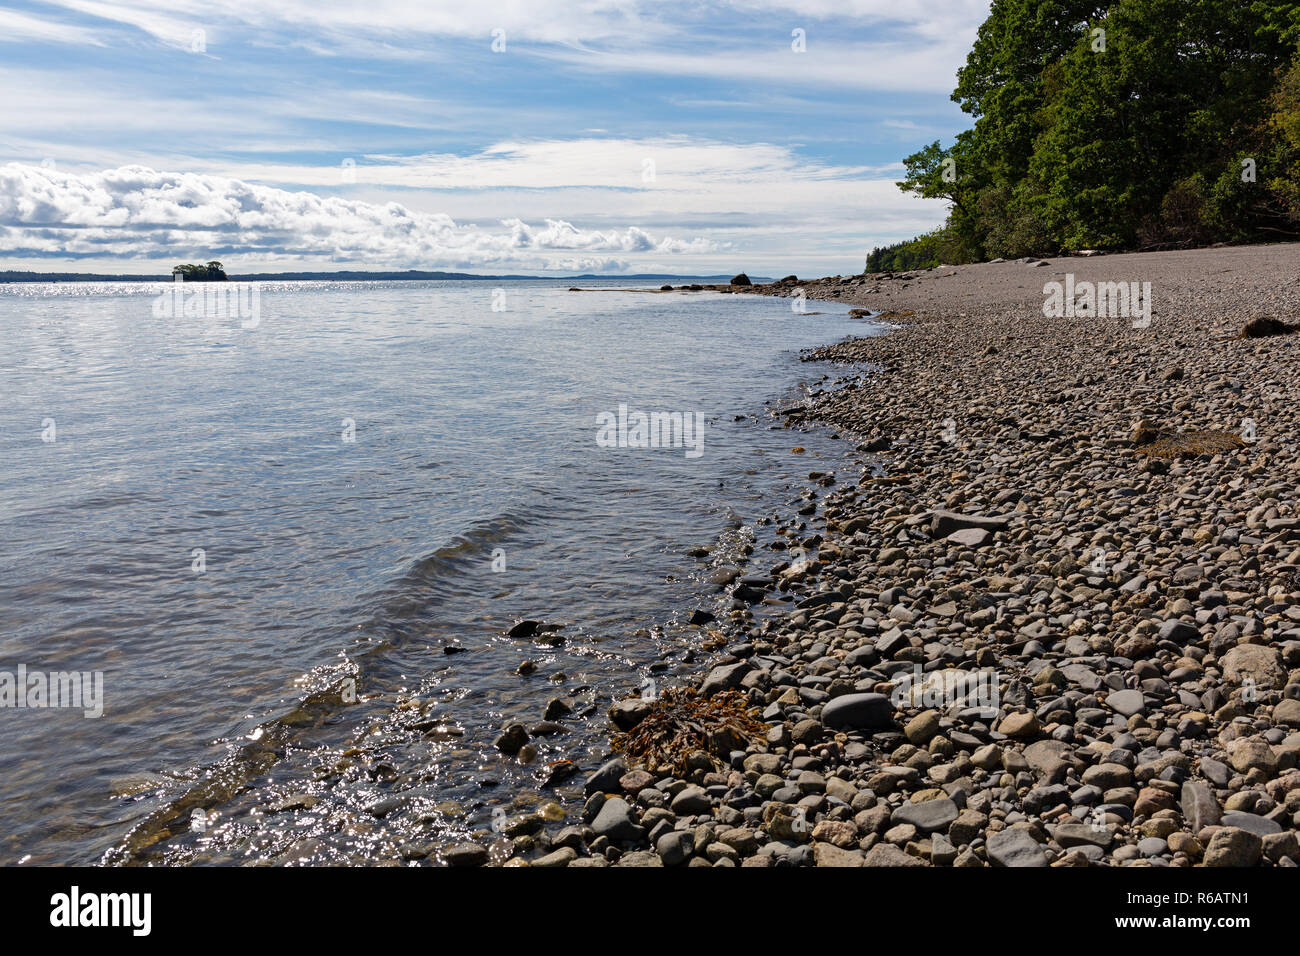 The coastline and the rocky beach of Sears Island on Penobscot Bay in Maine in the summertime. Stock Photo